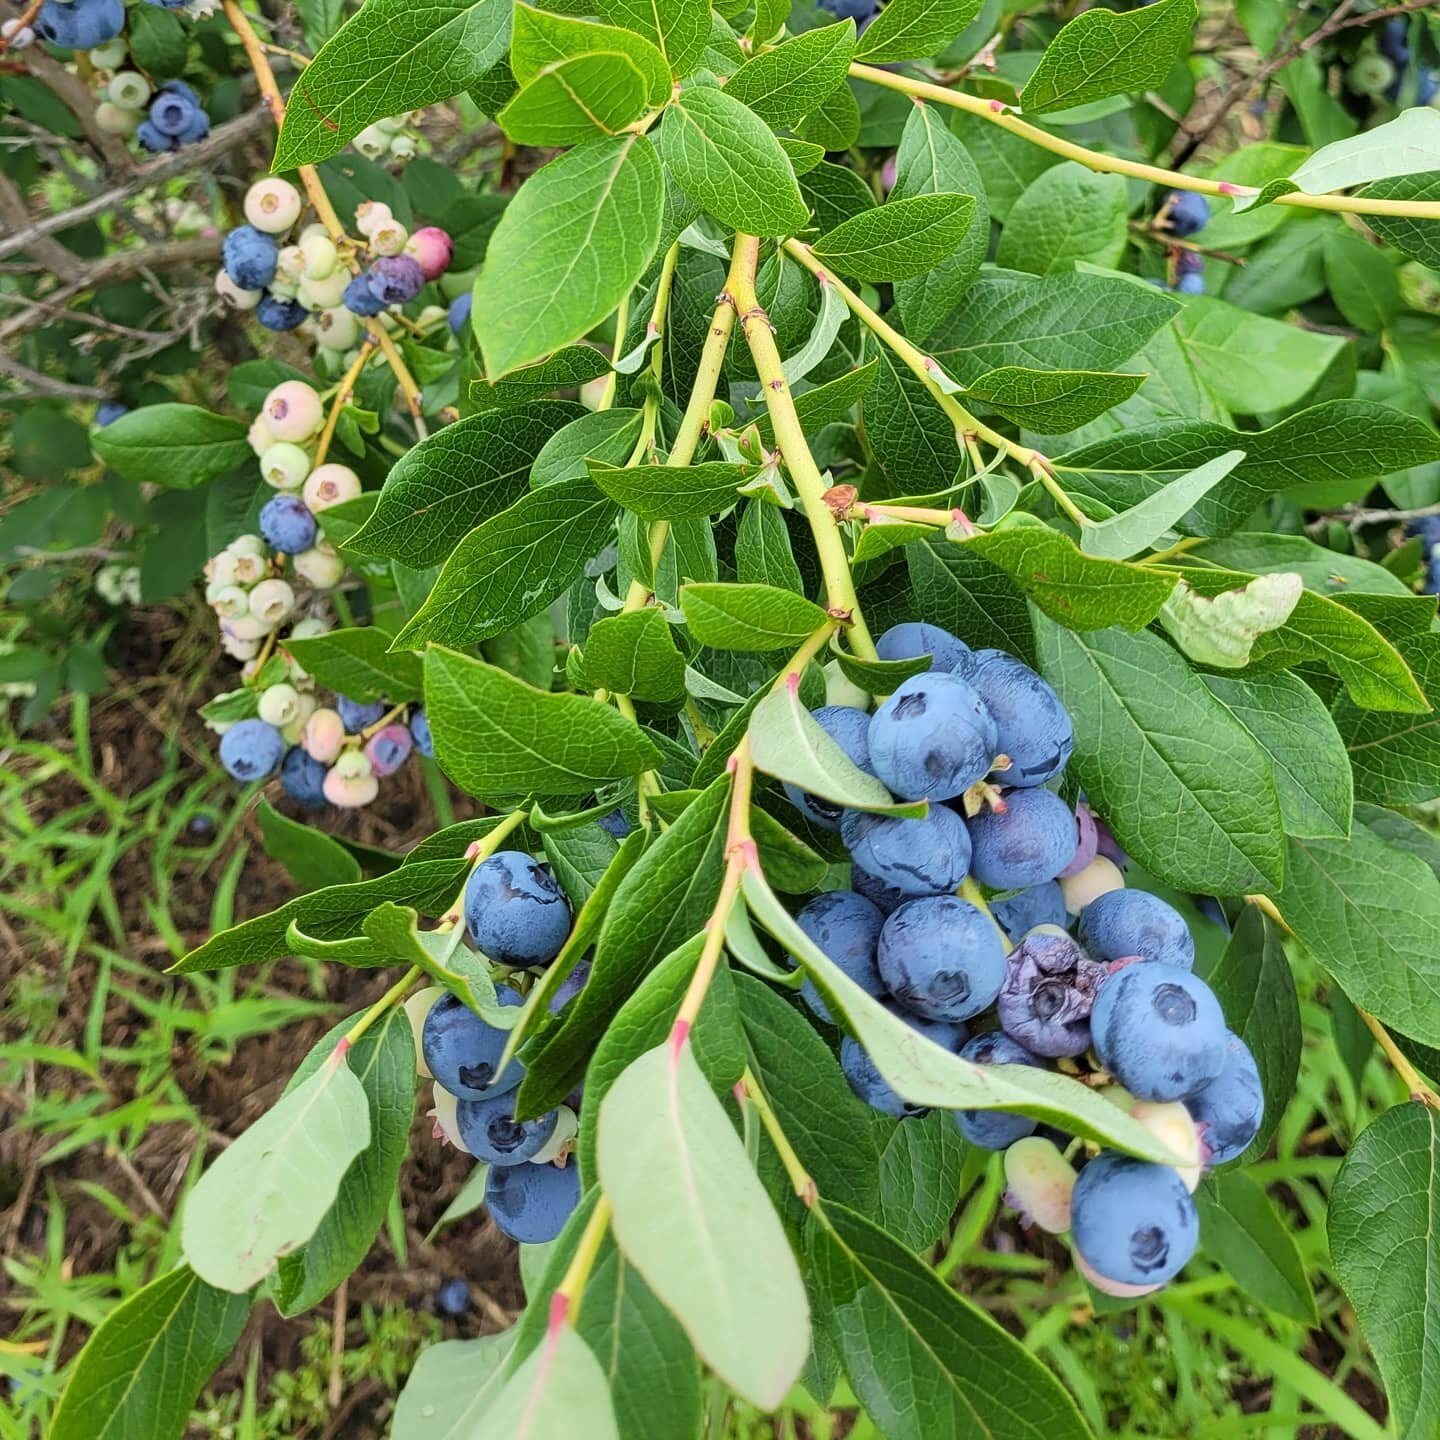 Our Hebron Ave blueberries will be open for our 1st day tomorrow. This Thursday the picking will be great! 90% blue and ready to go.  We will be open 9 to 4.  Stay tuned for pick your own veggies.  Starting soon if the sun comes back out!  3582 Hebro